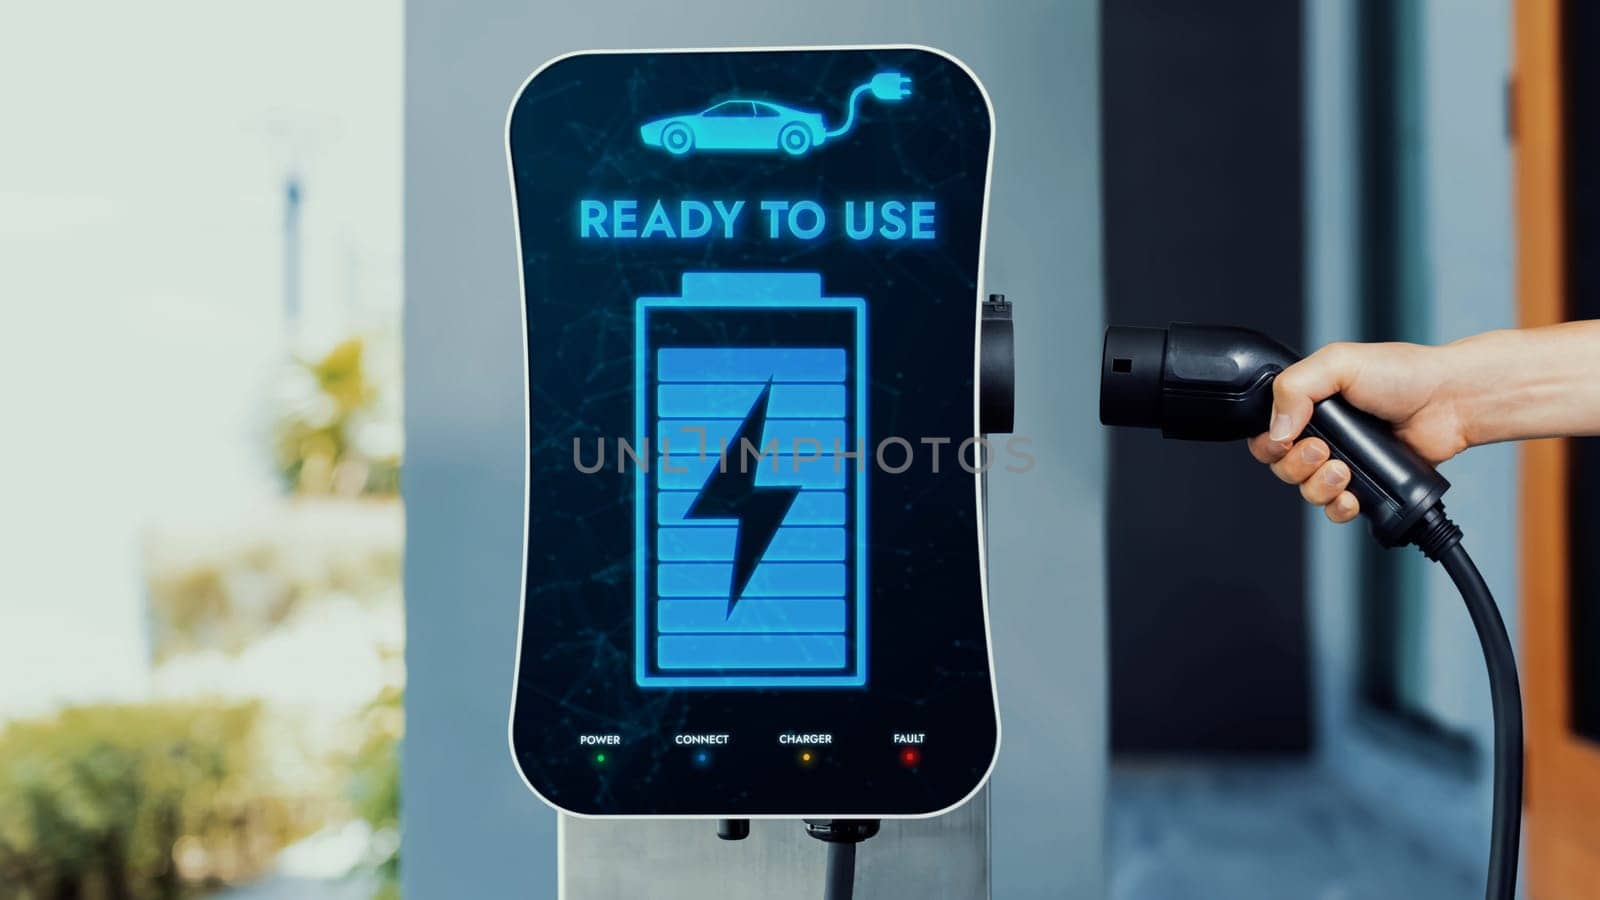 Home electric charging station showing battery status interface on screen with hand holding EV charger. Technological advancement of alternative energy sustainability and EV car. Peruse